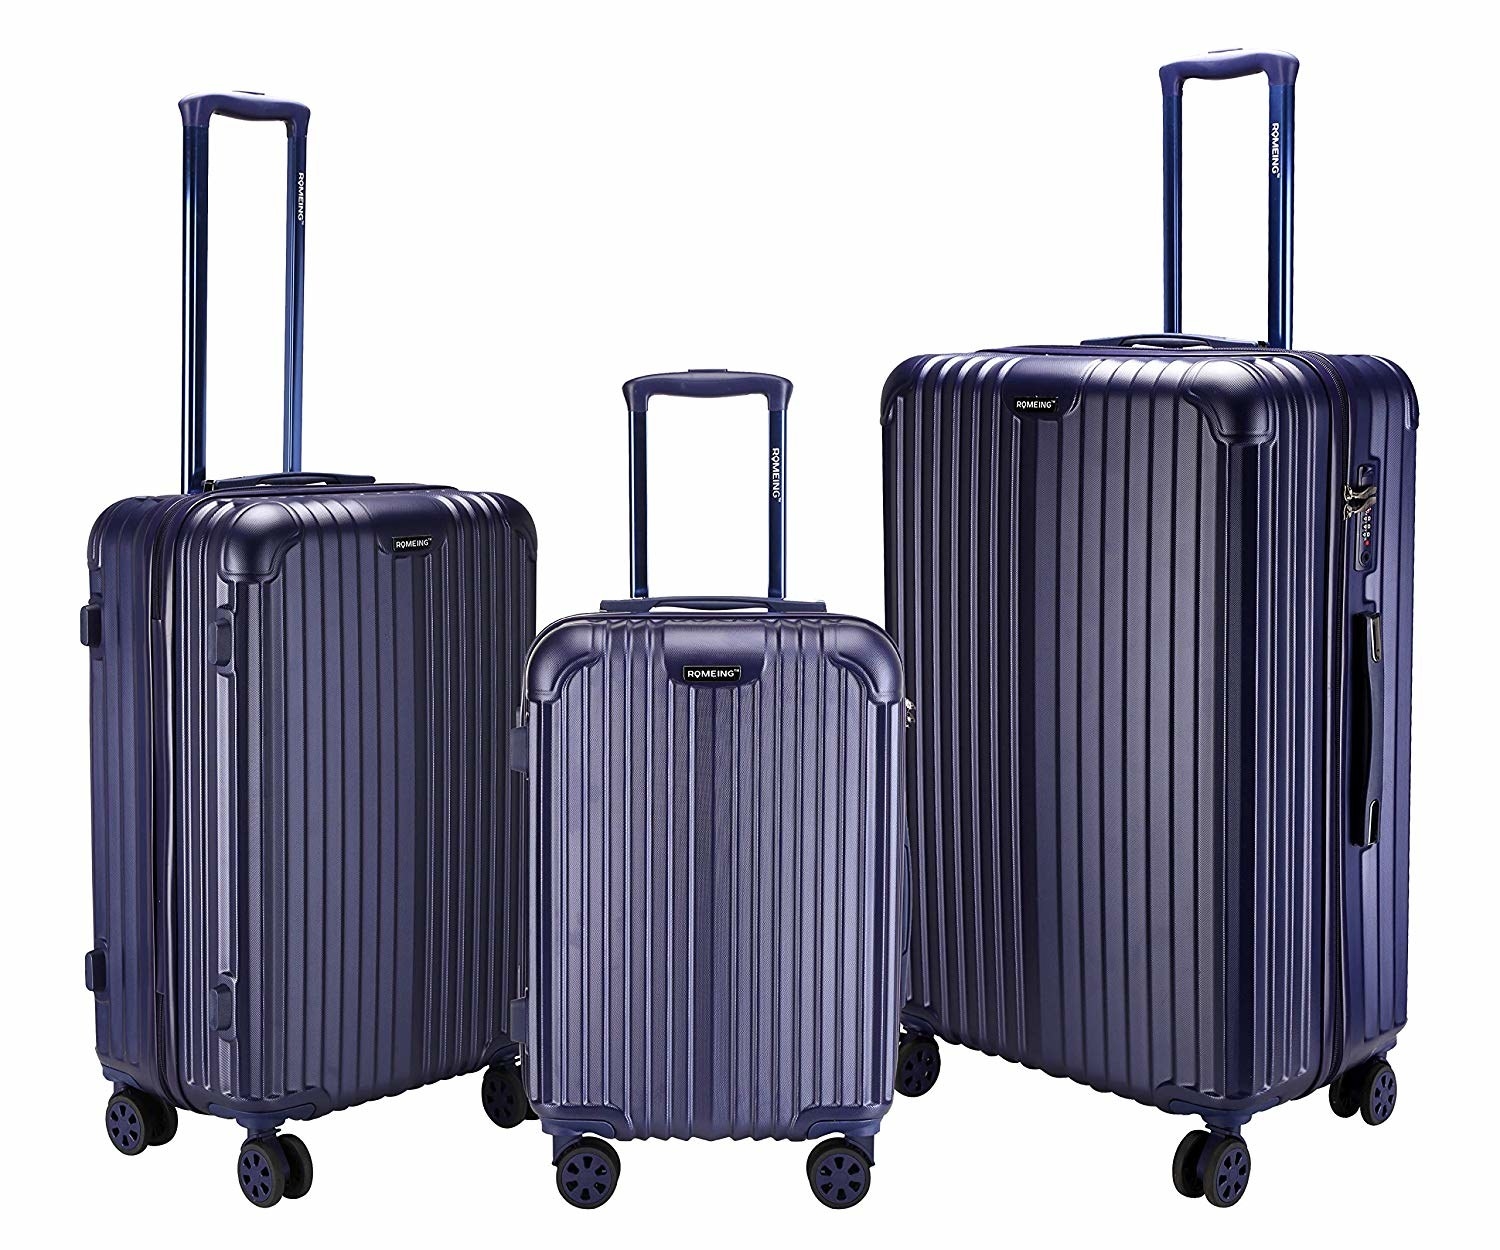 ROMEING Capri 20 inch, Polycarbonate Luggage, Hard-Sided, (Silver 55 cms)  Cabin Trolley Bag - Price History